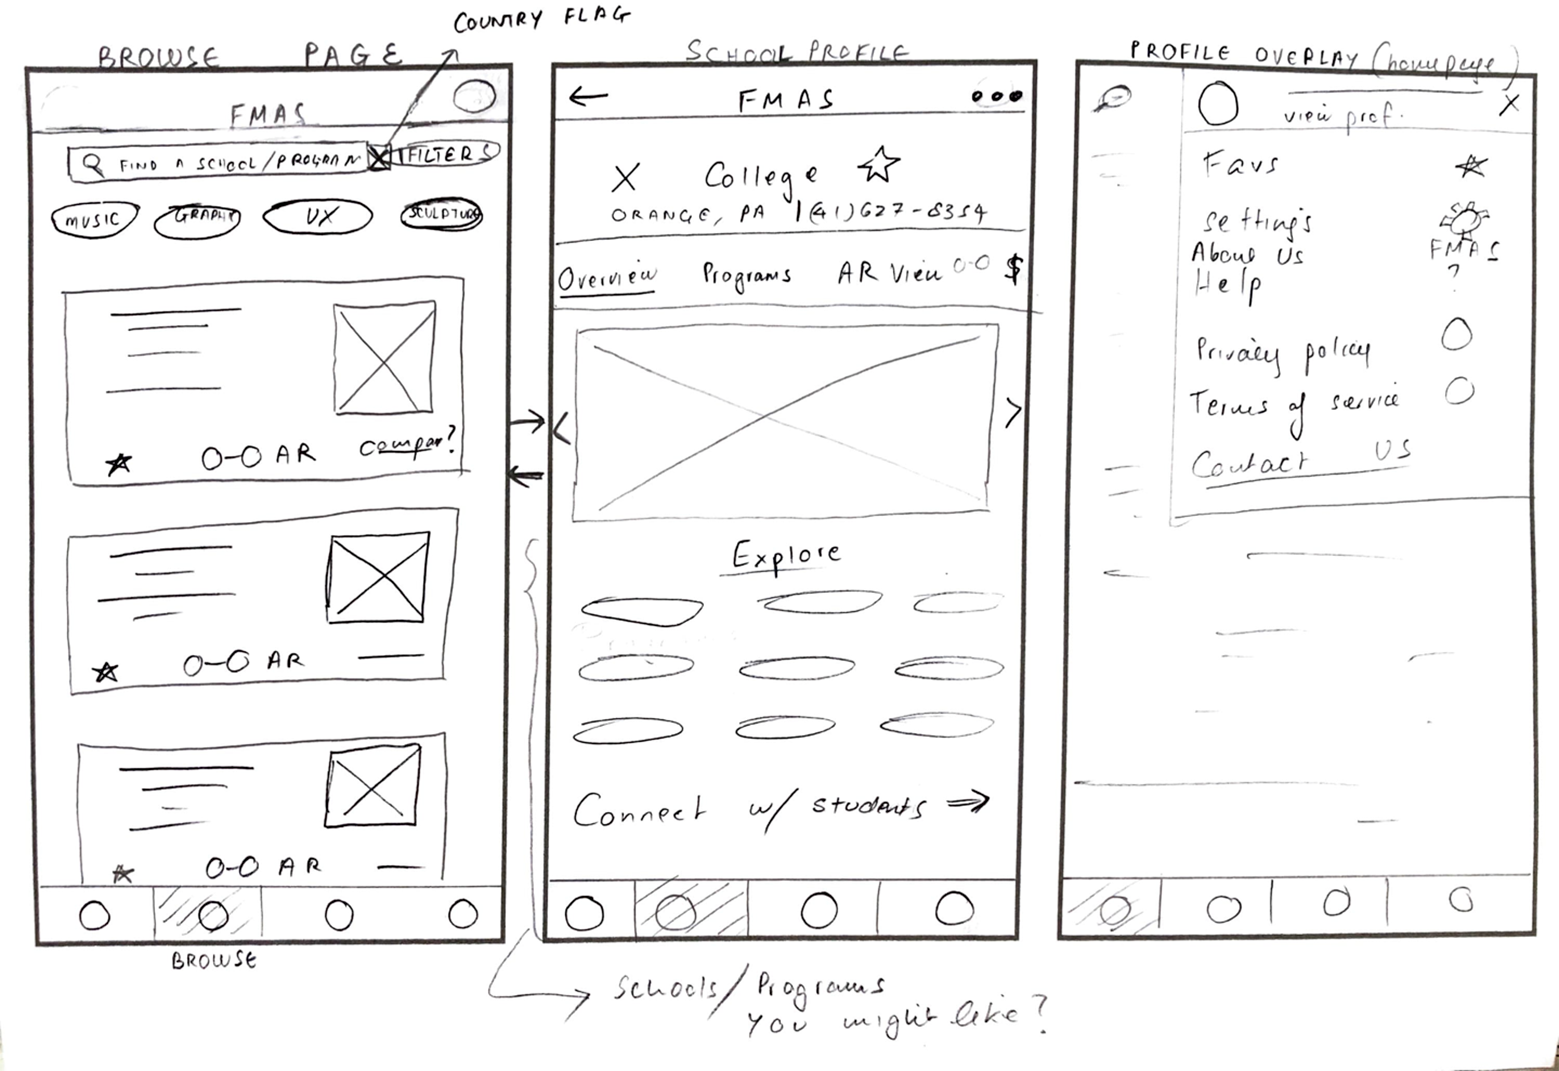 Wireframes: browse, school profile/information, profile overlay